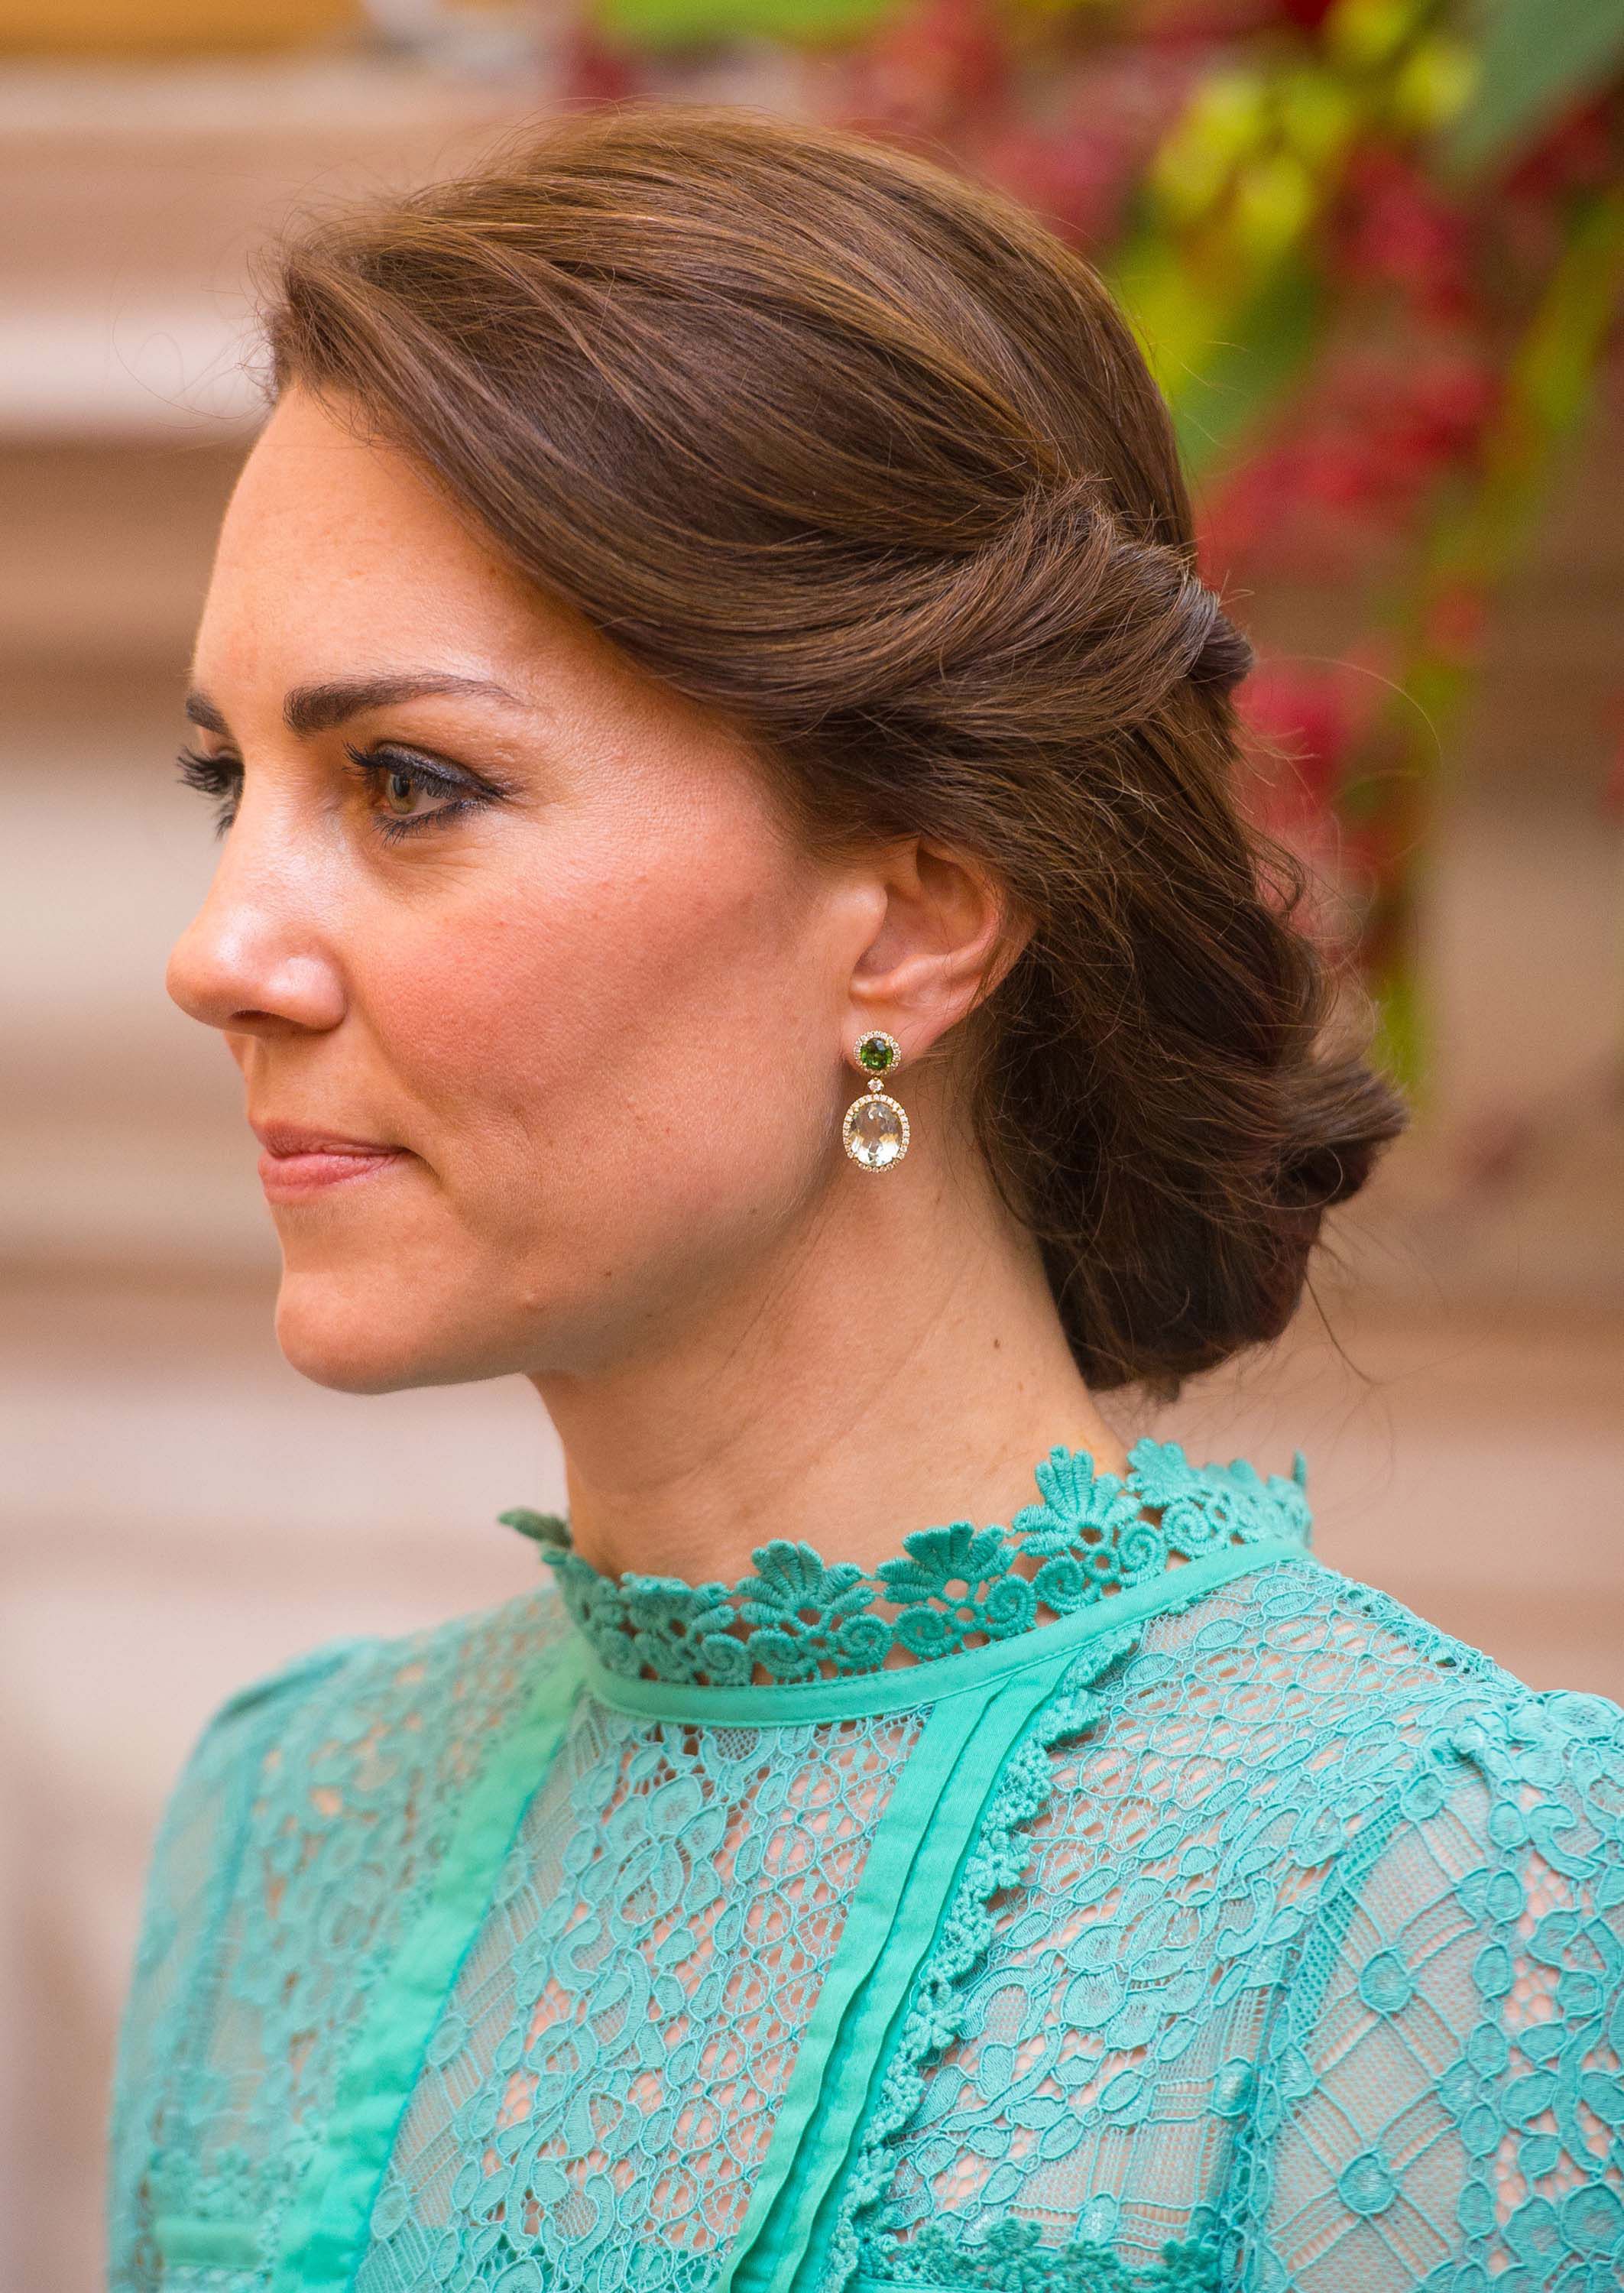 Crowning Glory: 8 Timeless Hairstyles of Kate Middleton - Fermentools